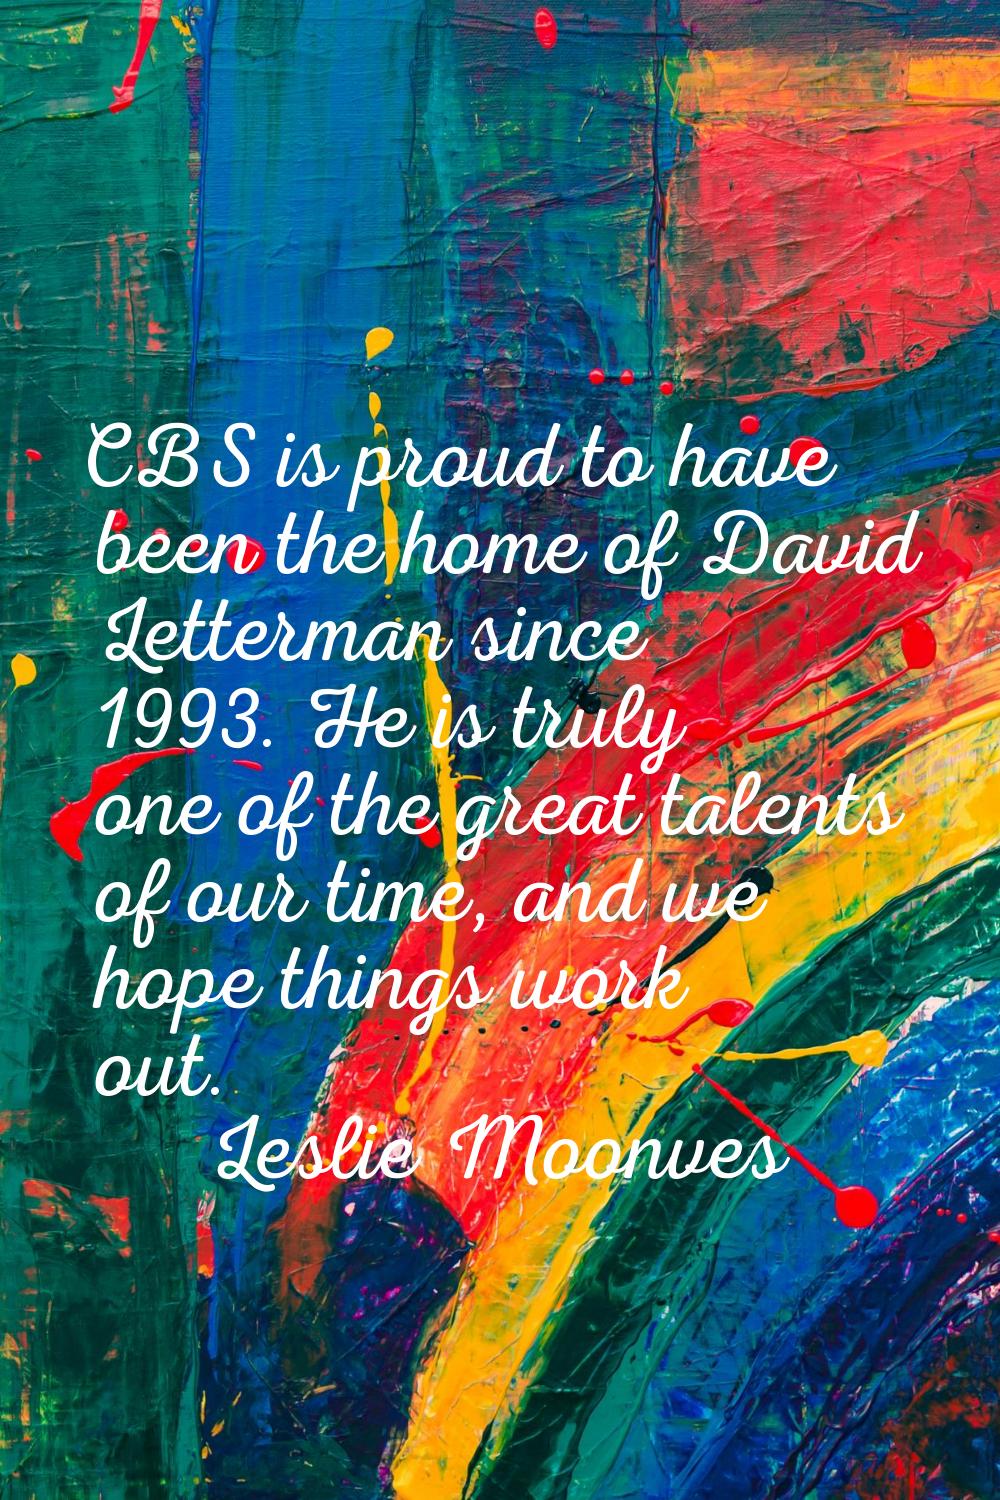 CBS is proud to have been the home of David Letterman since 1993. He is truly one of the great tale